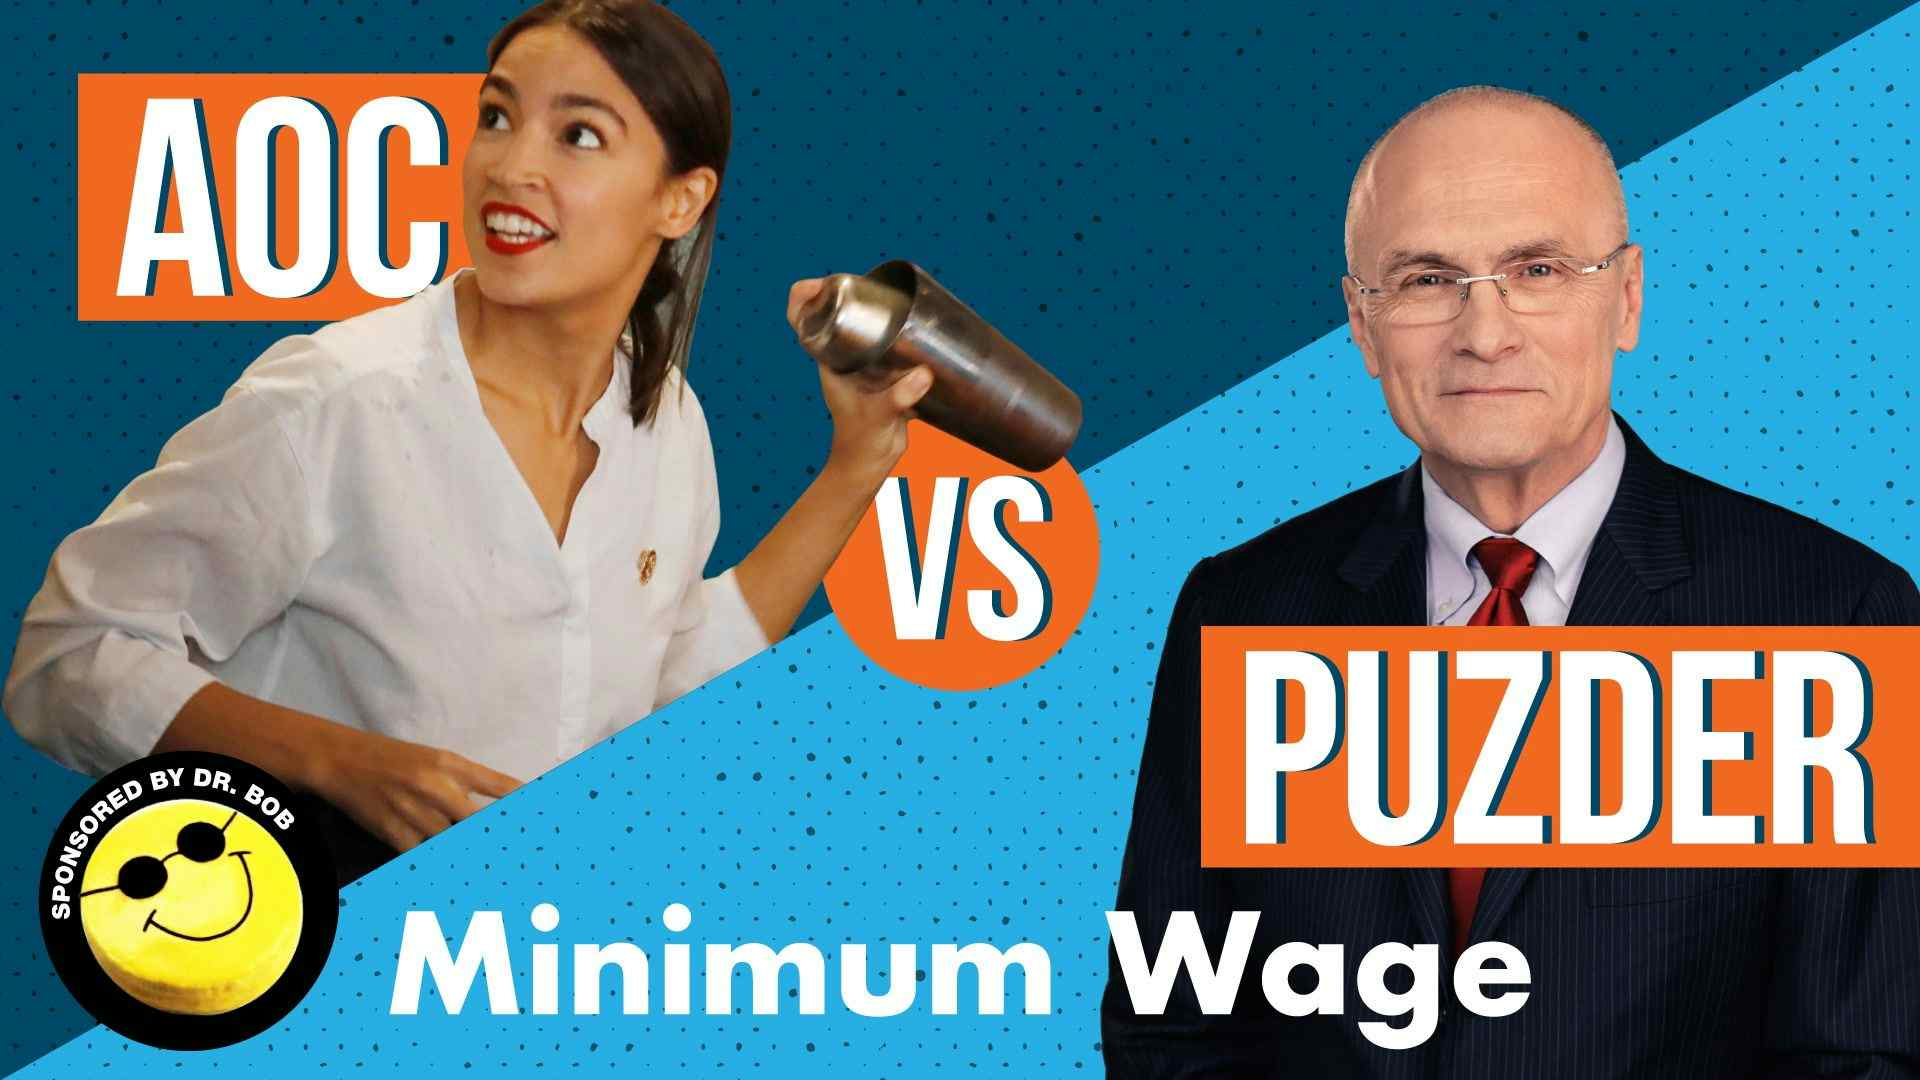 AOC Is Wrong About the Minimum Wage